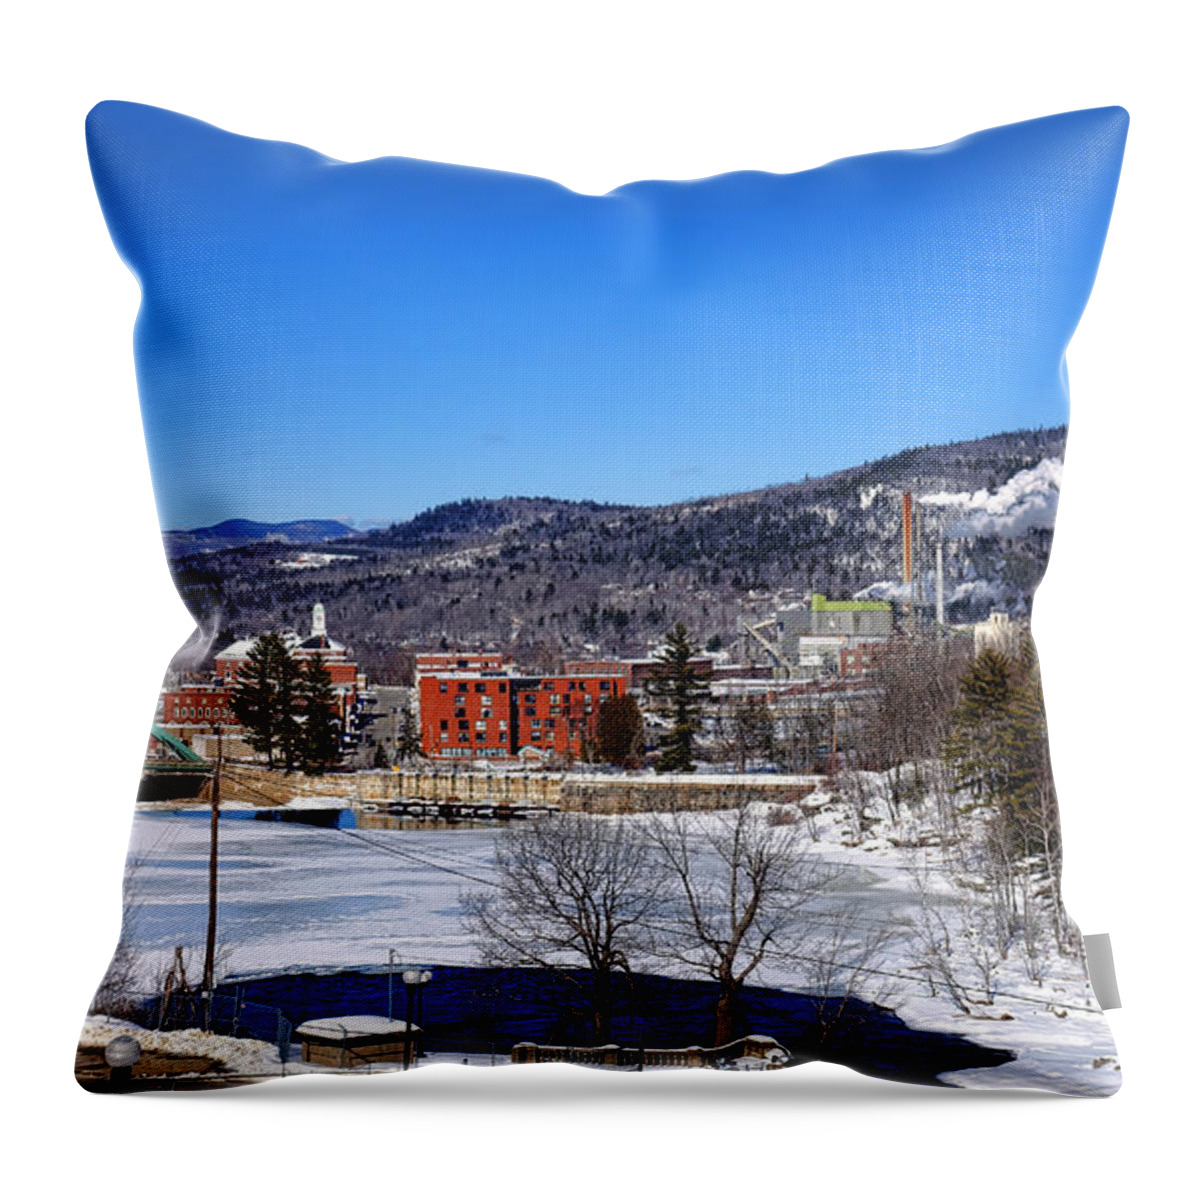 Rumford Throw Pillow featuring the photograph Rumford in Winter by Olivier Le Queinec